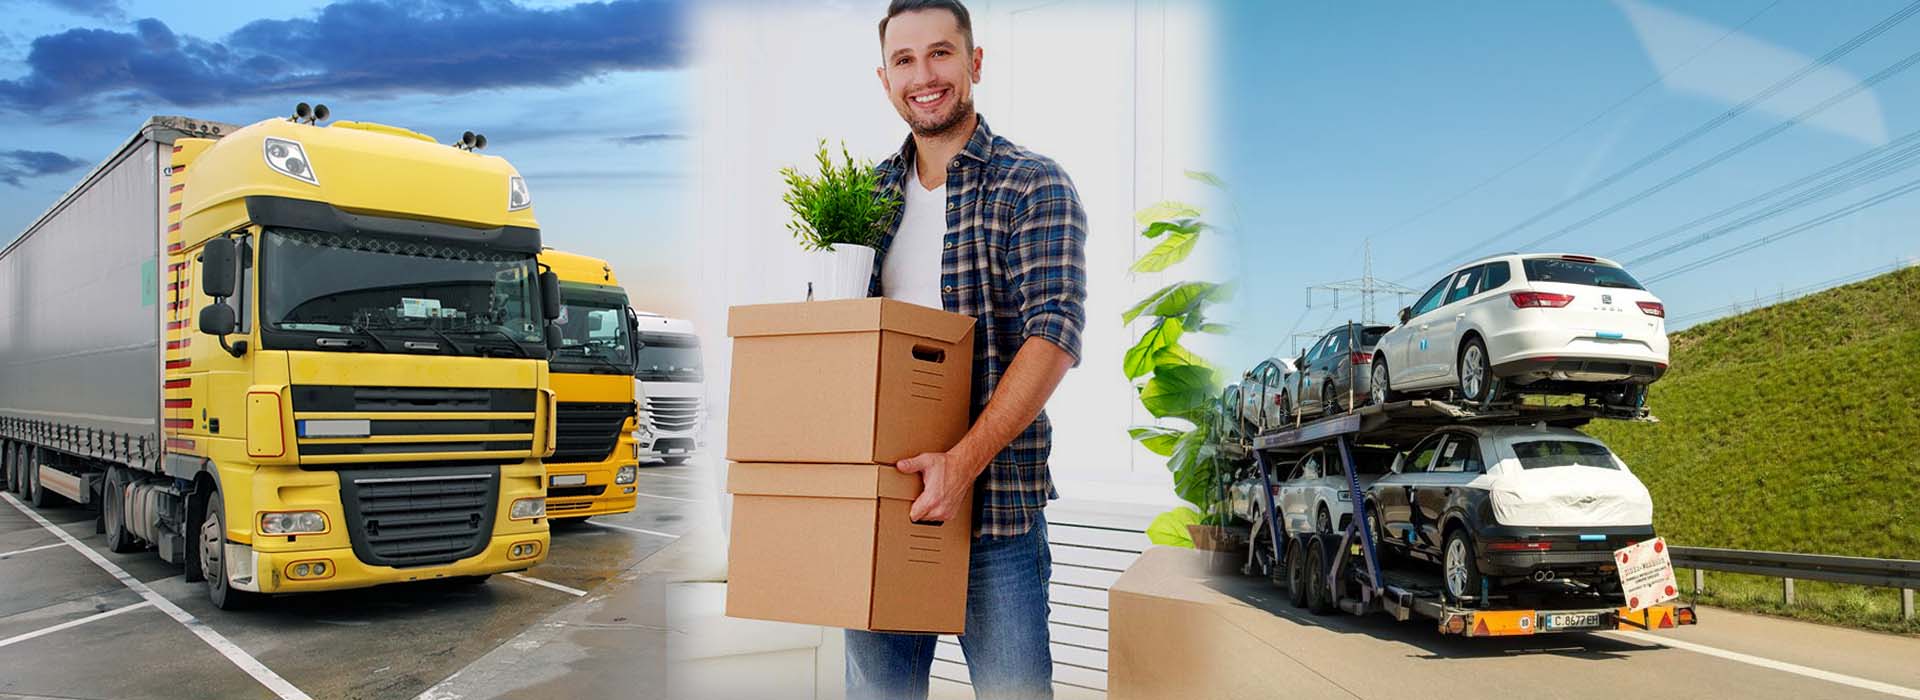 packers and movers jabalpur, movers and packers jabalpur